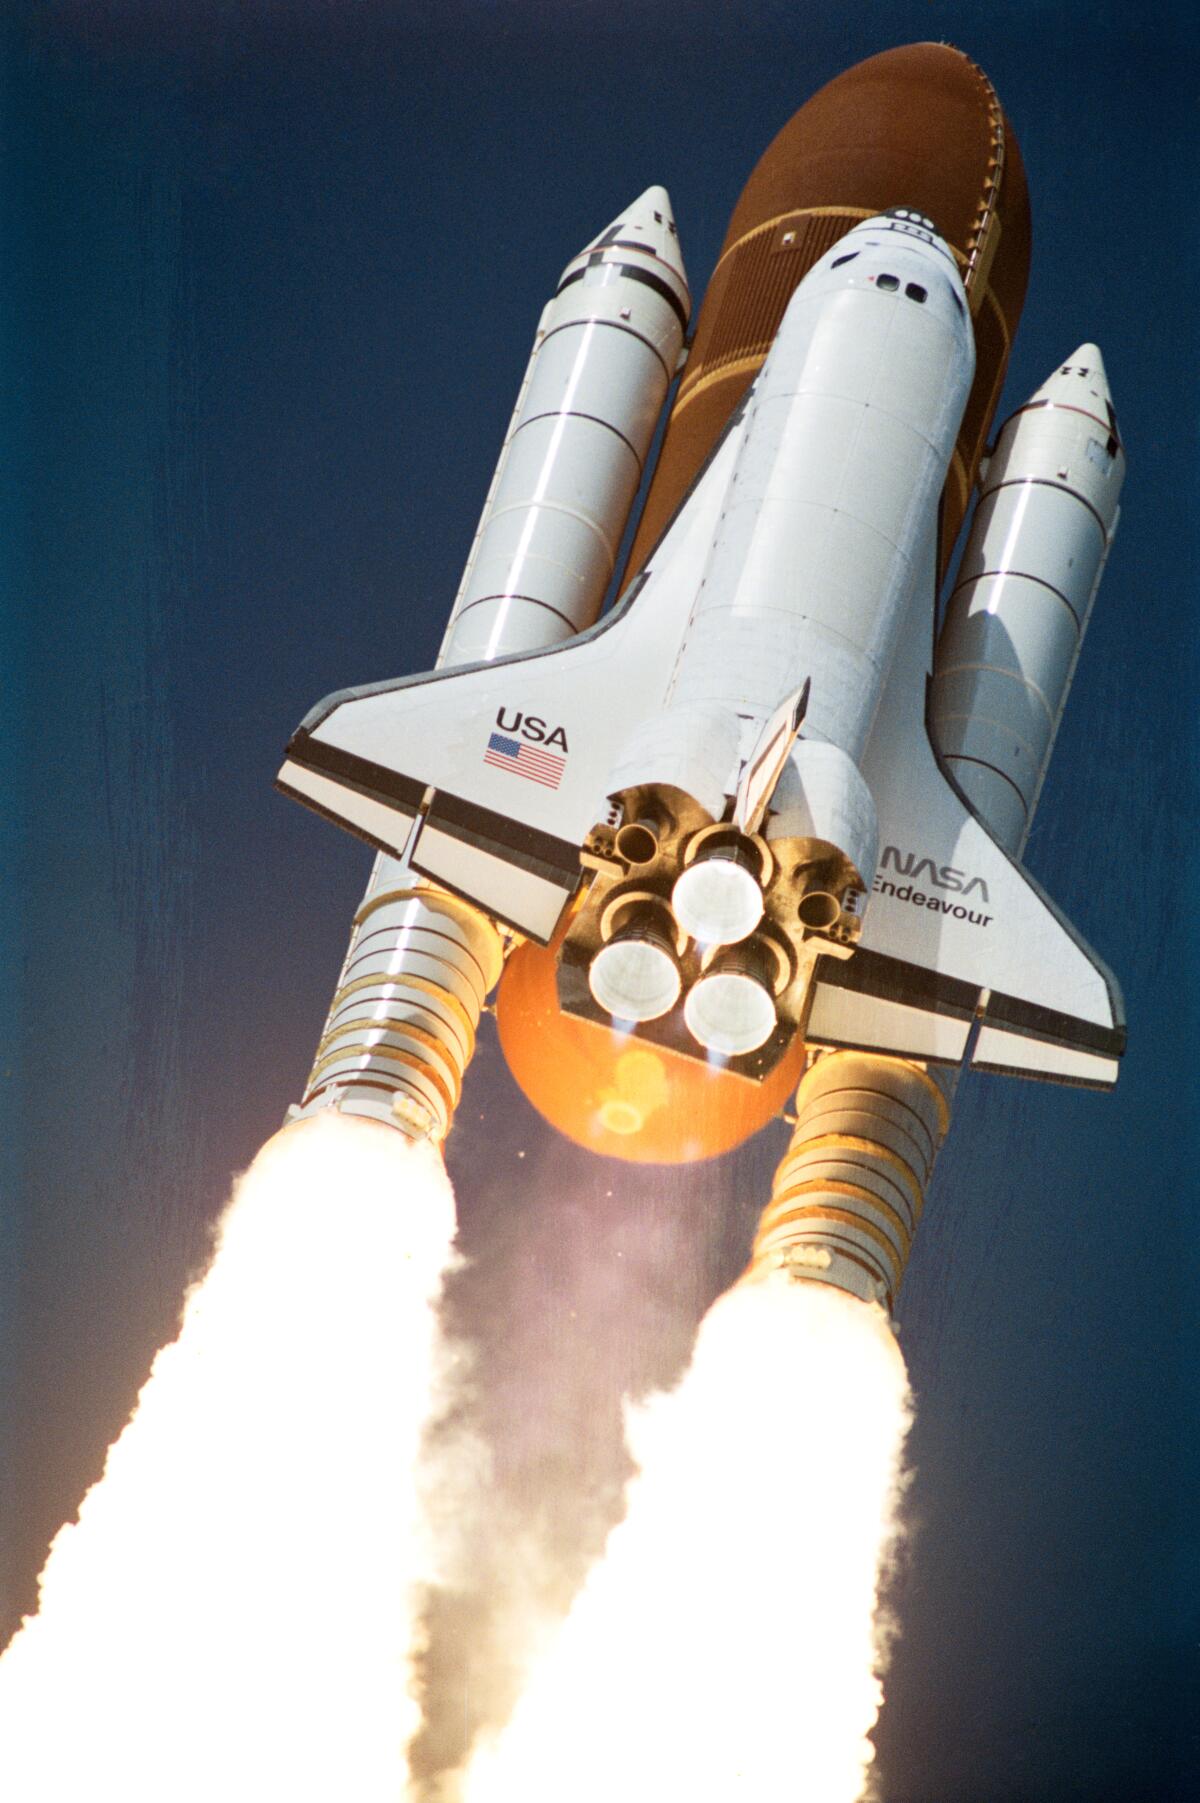 A space shuttle heads into space